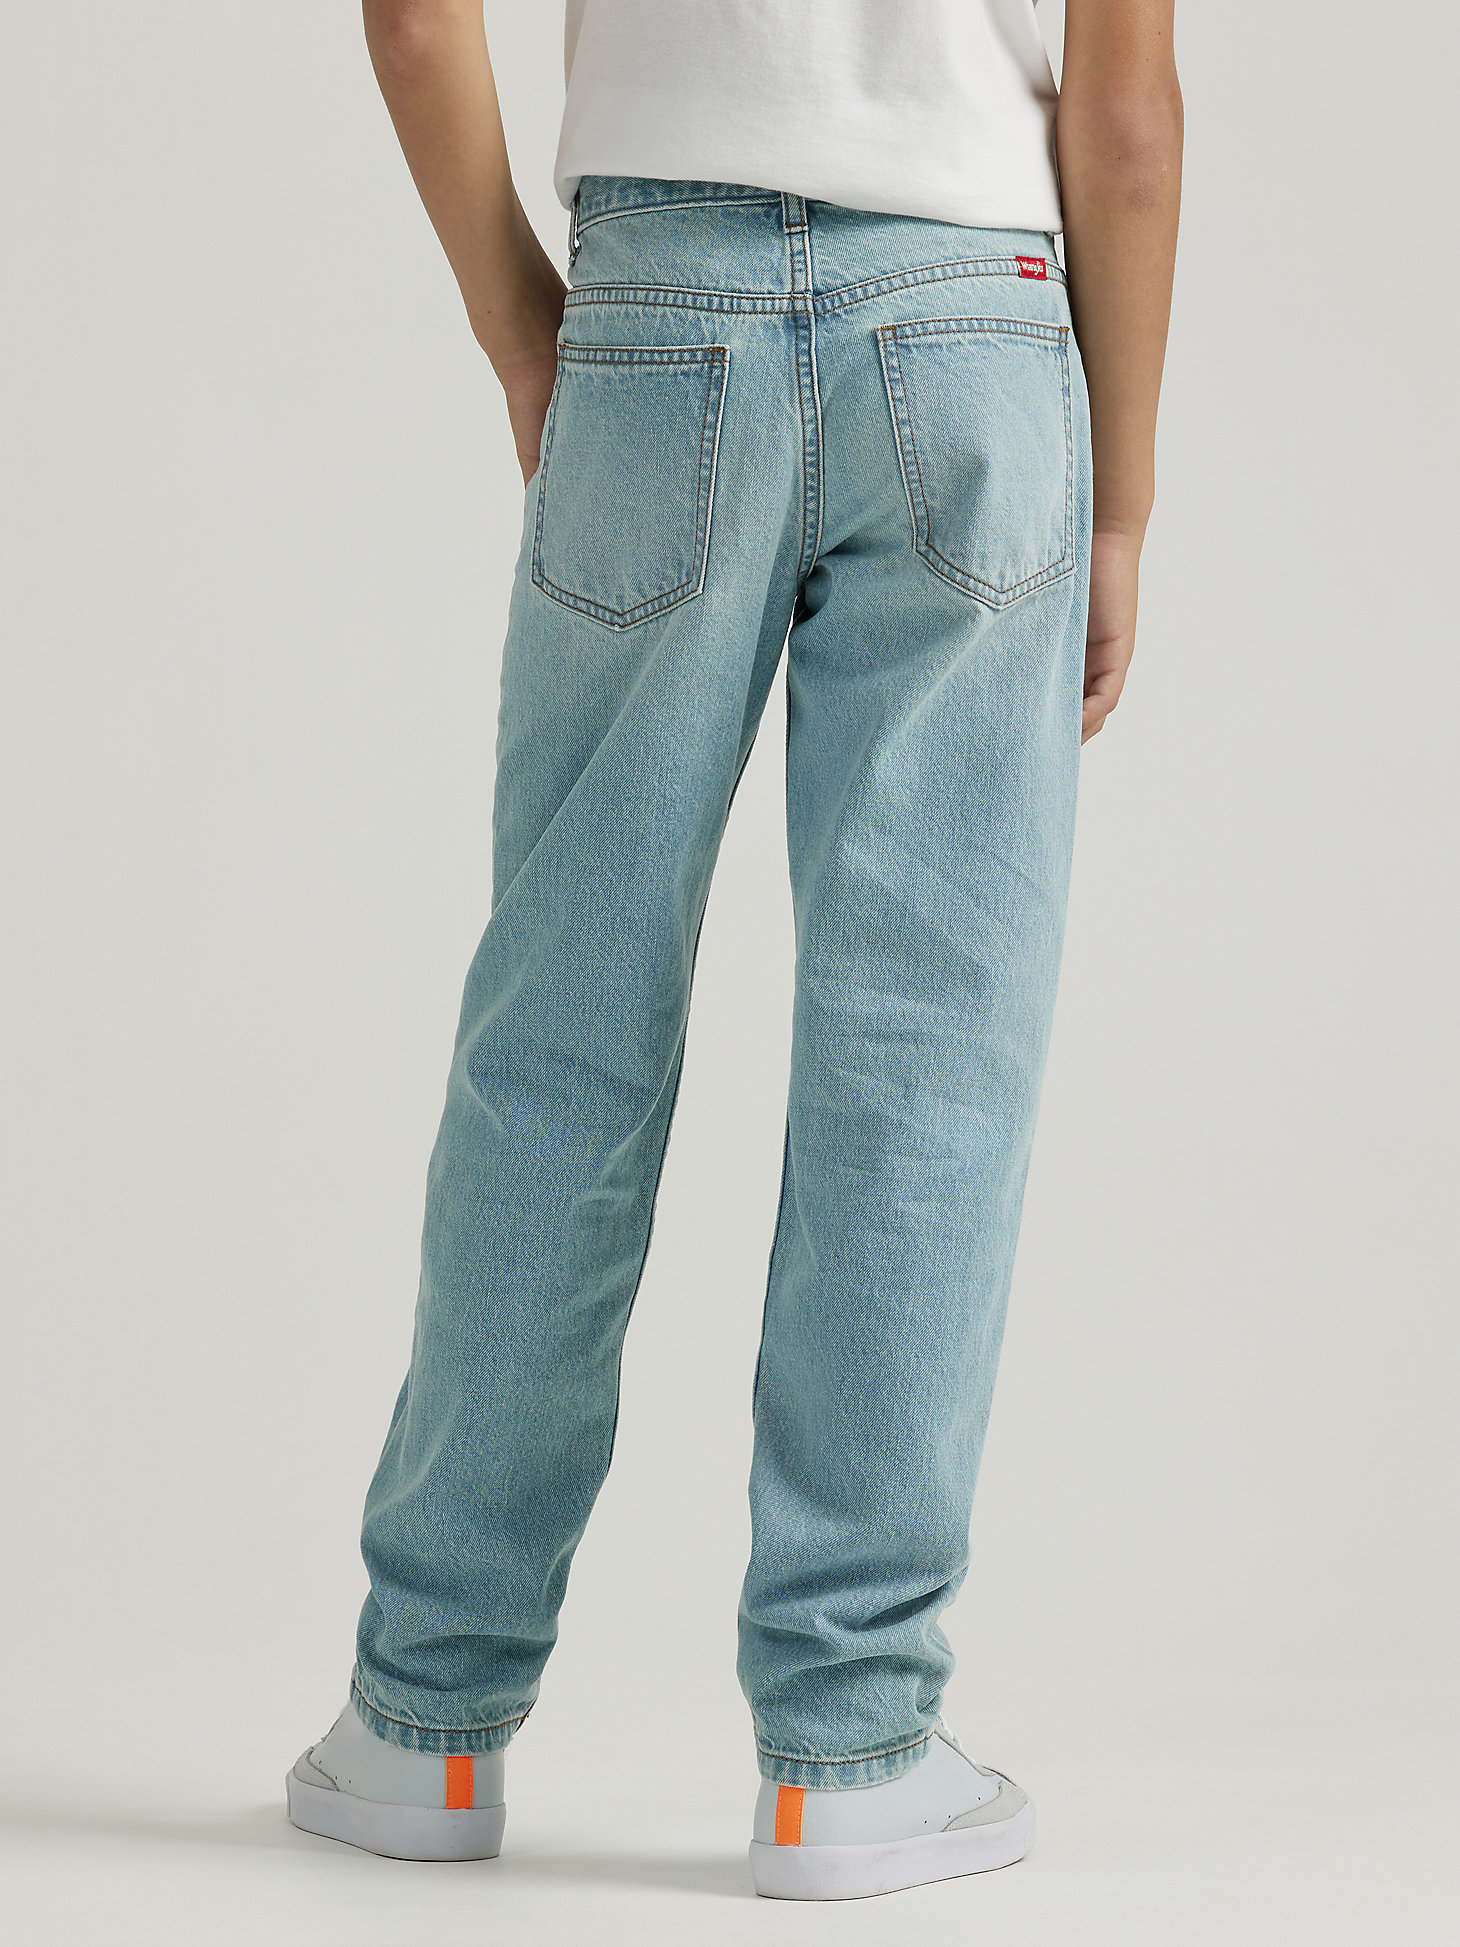 Boy's Relaxed Fit Tapered Jean (8-16) in Dusty Blue alternative view 1